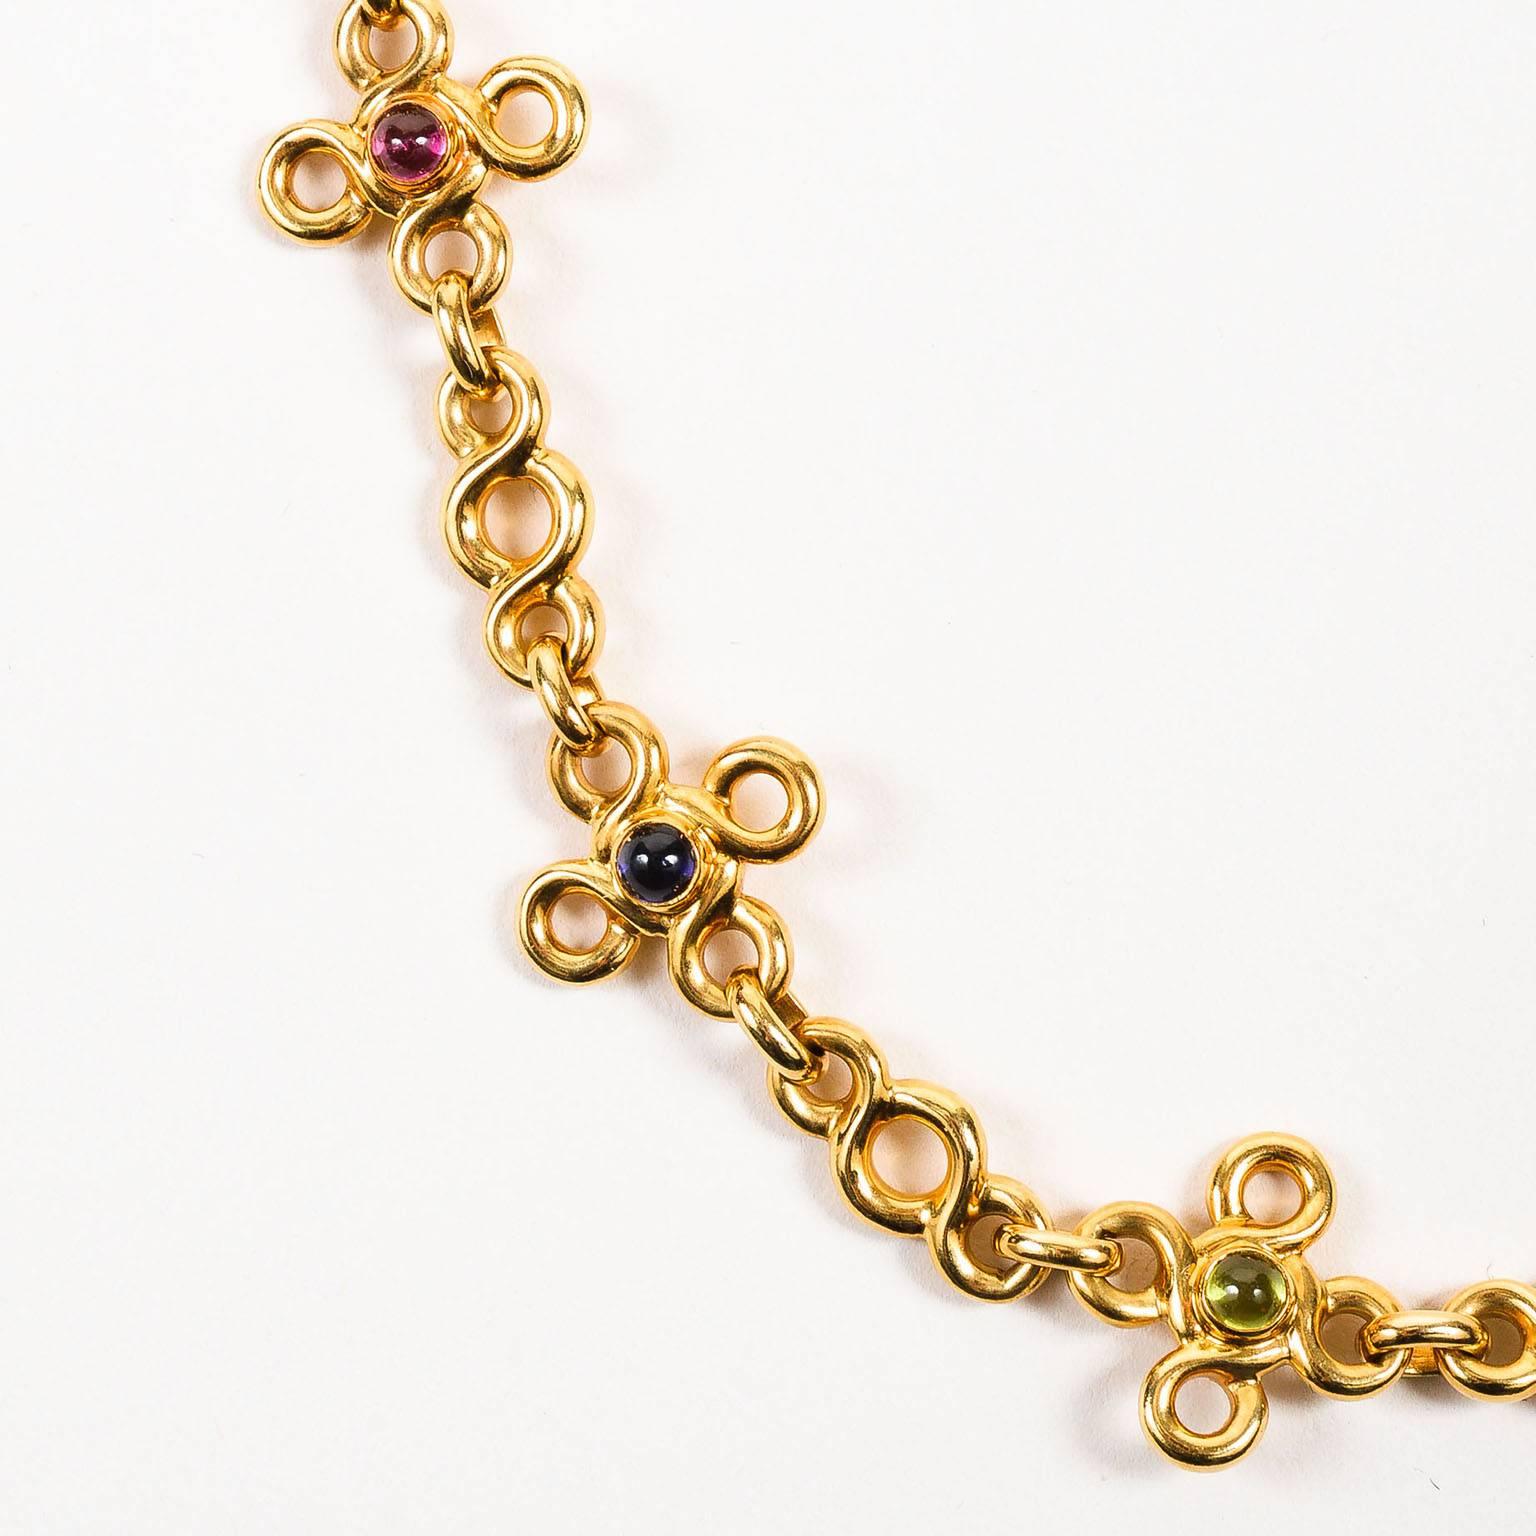 Extremely rare Chanel necklace. This stunning piece from the 1990's is a highly collectible treasure. A timeless design constructed of fine materials, in true Chanel fashion. Wear on a bare décolletage to let this beautiful necklace take center